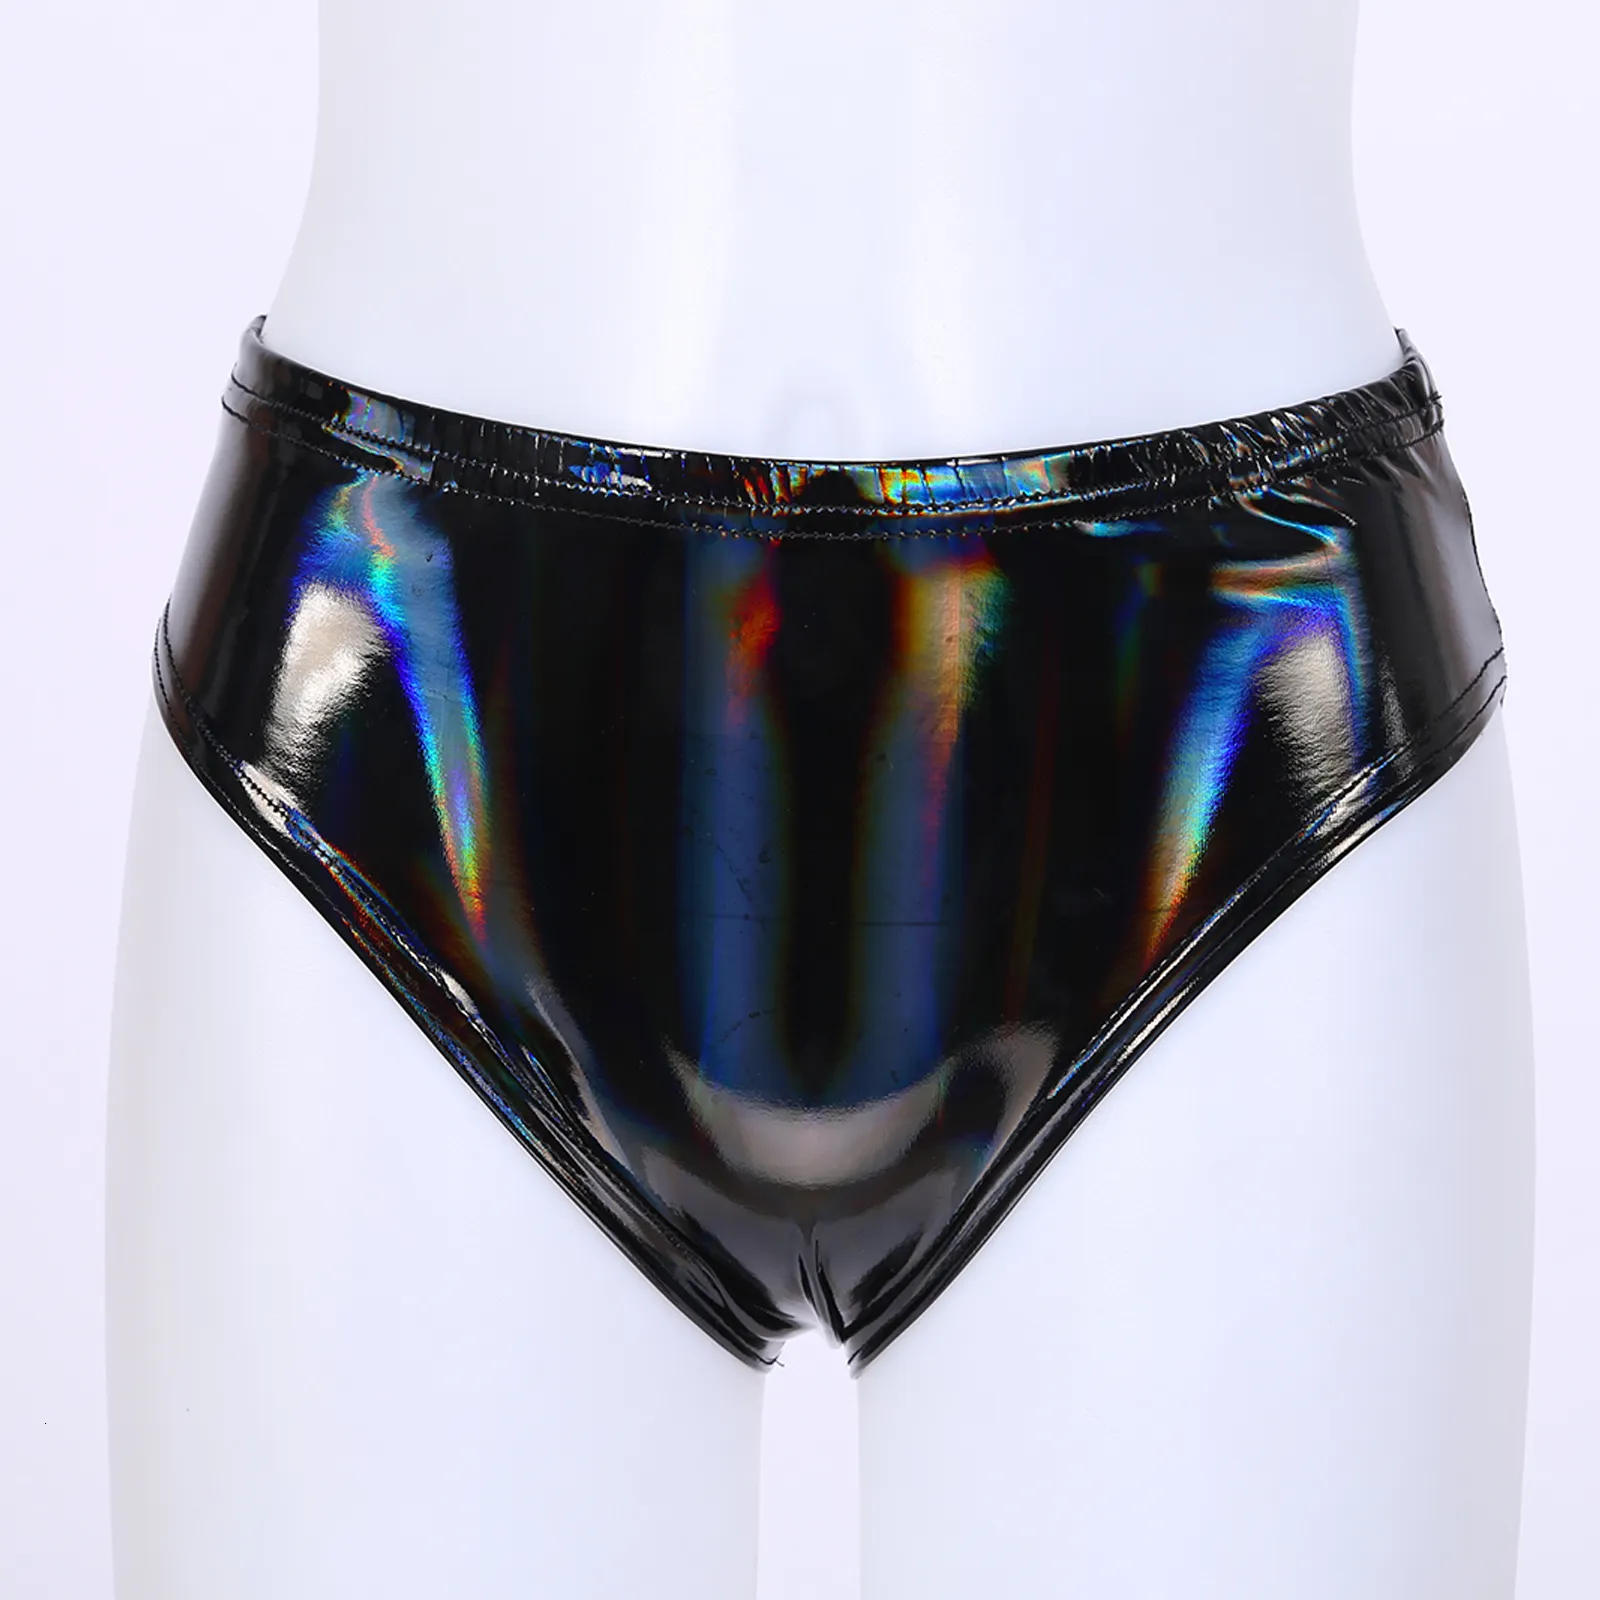 Wetlook Patent Leather Low Raise Elastic Waistband Pvc Panties For